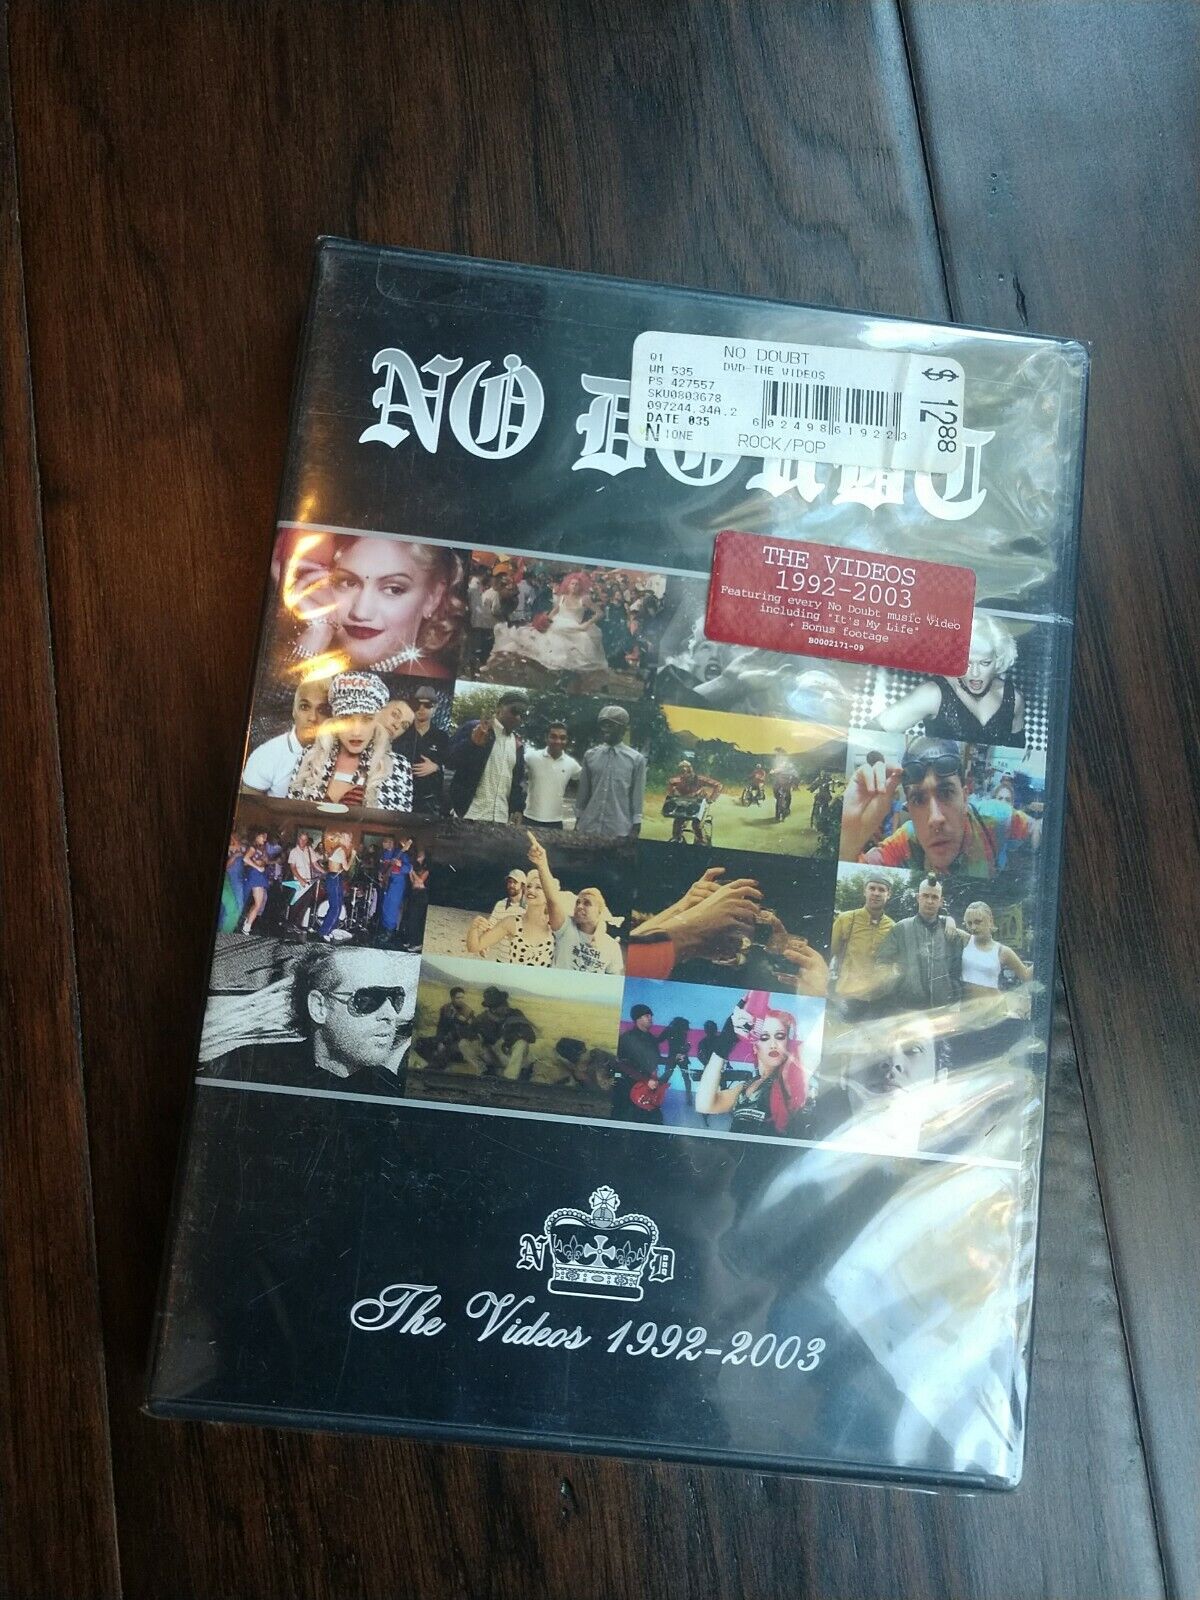 No Doubt: The Videos 1992-2003 DVD (2004) New Sealed Unopened